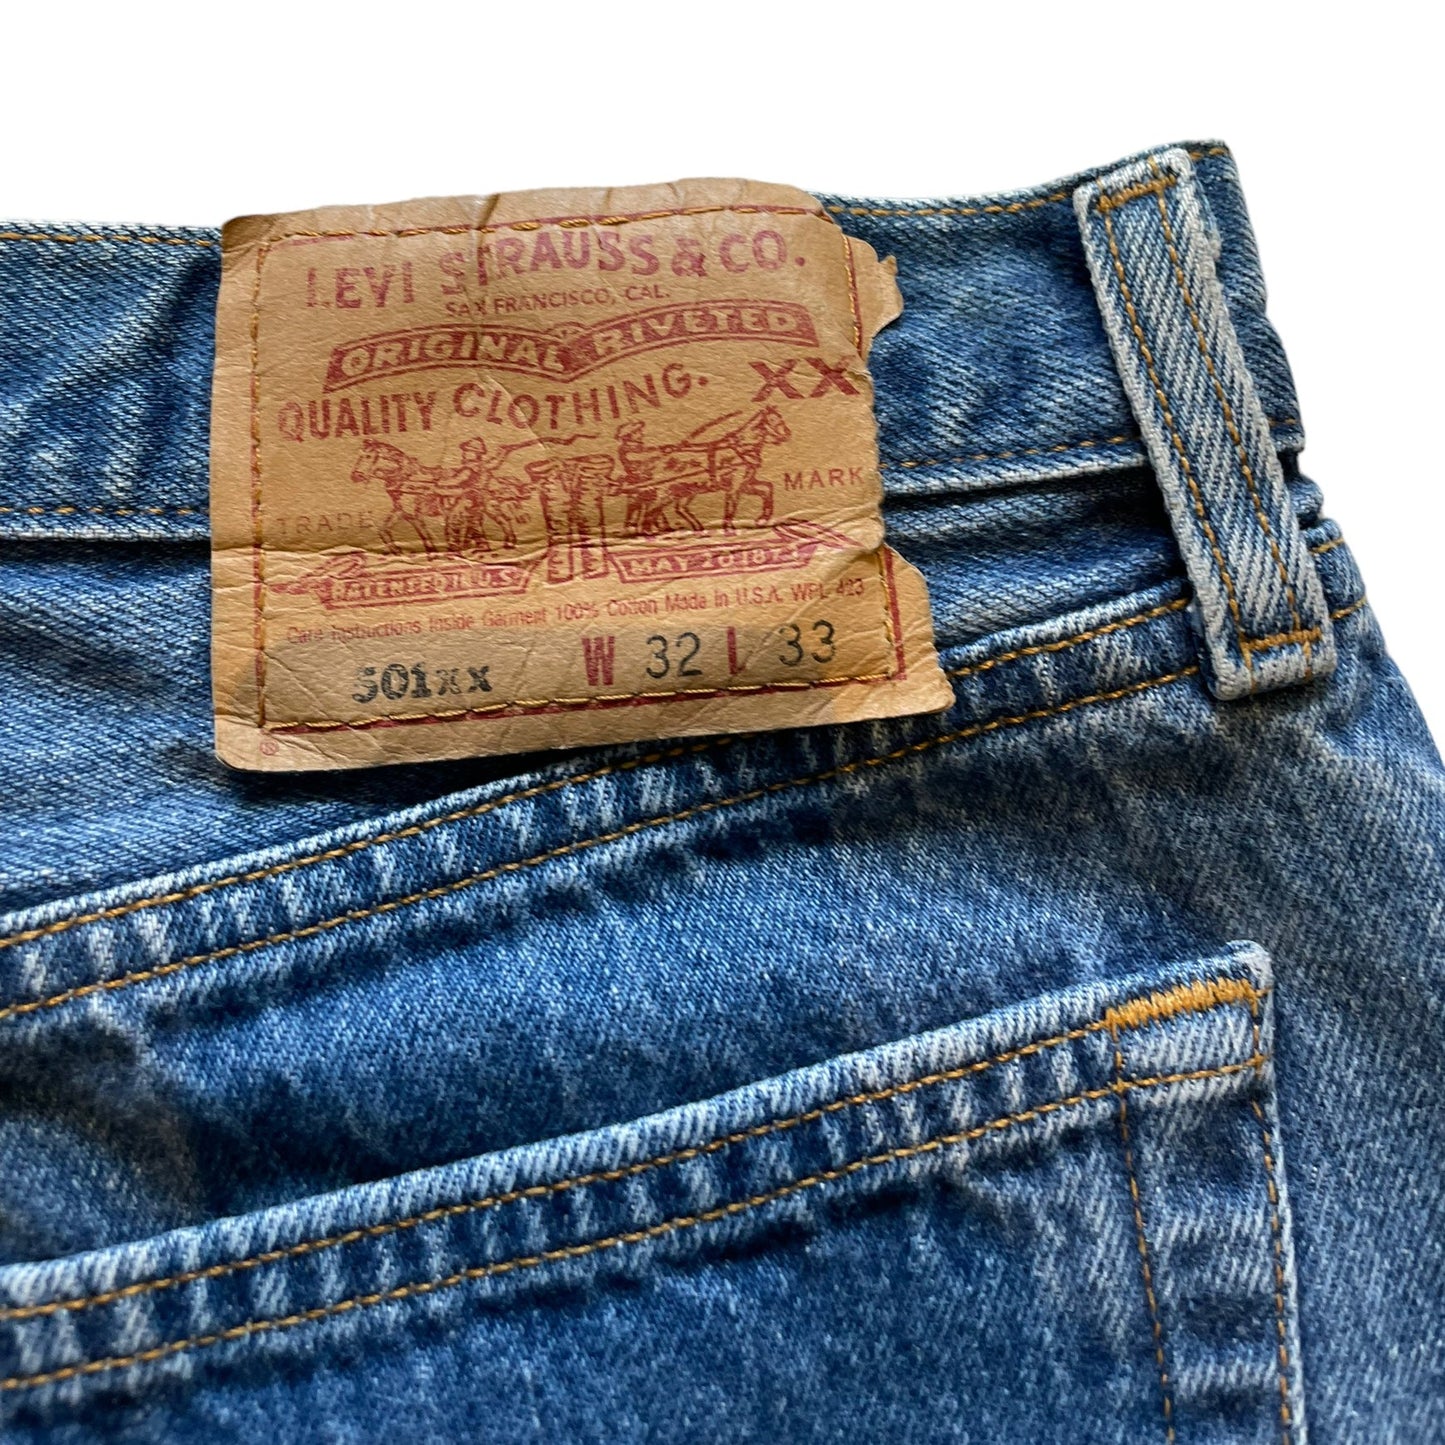 Back tag view of Vintage 501xx Levi's 32x33